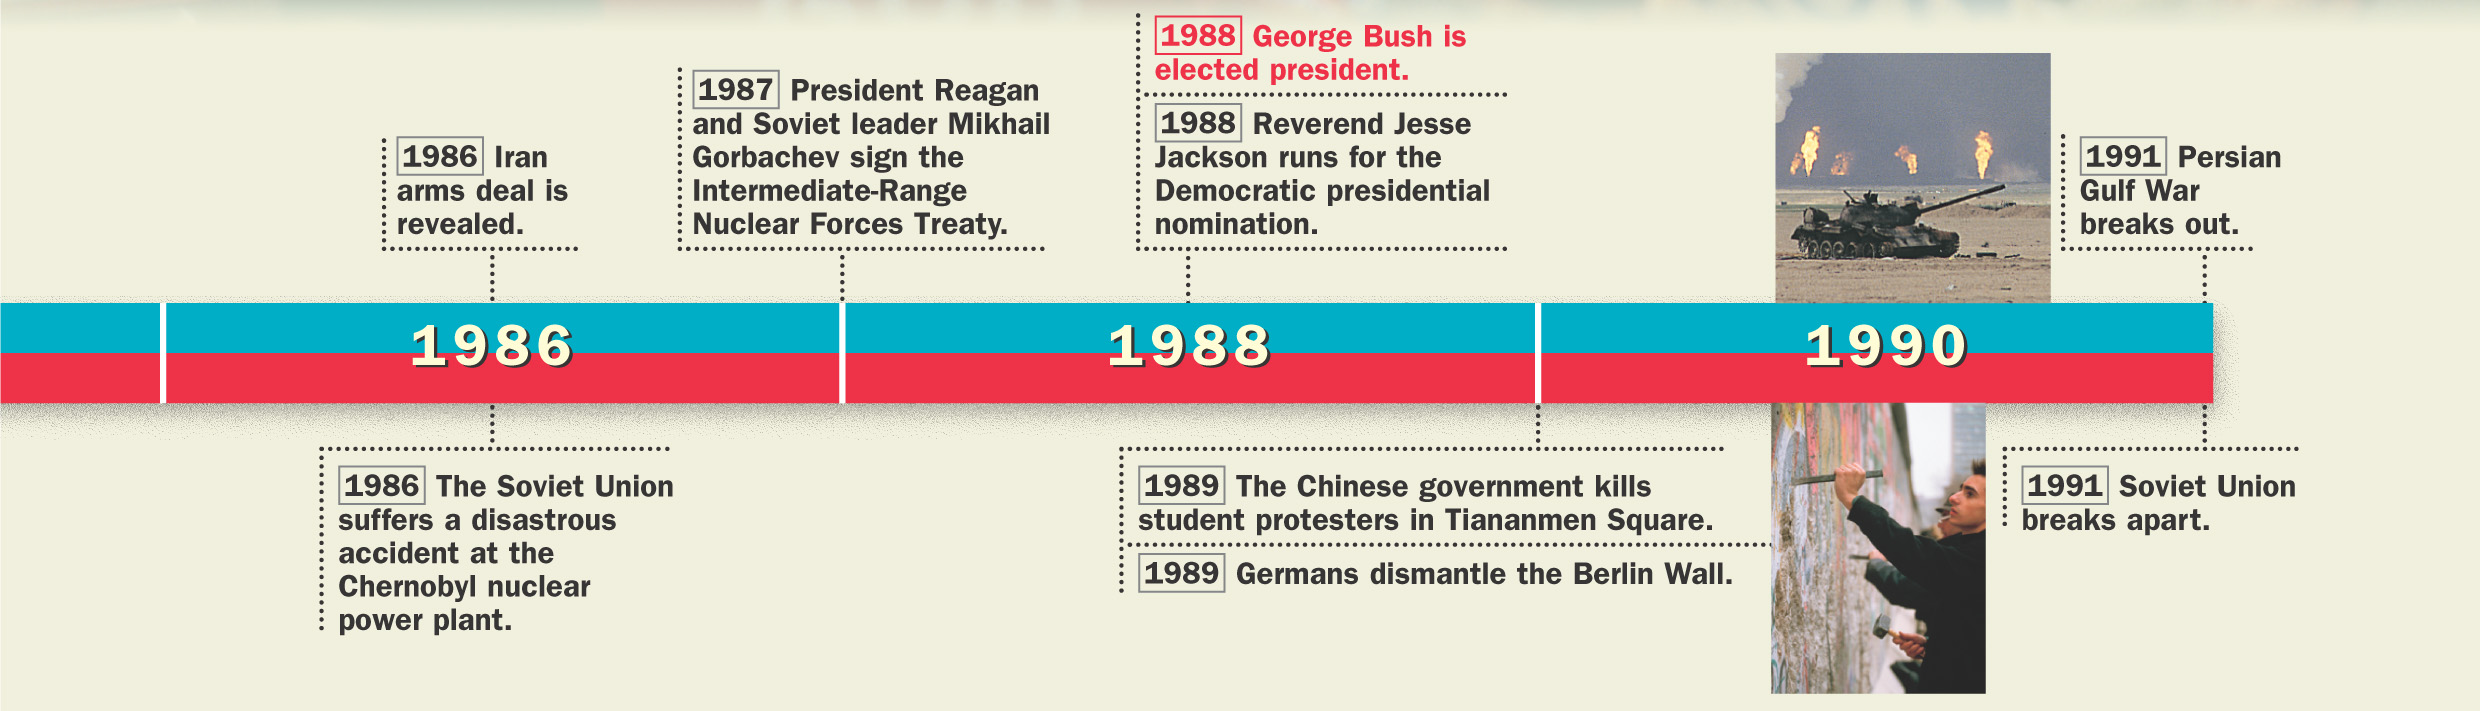 A timeline of historical events from 1980 to 1991 in both the U.S. and the world